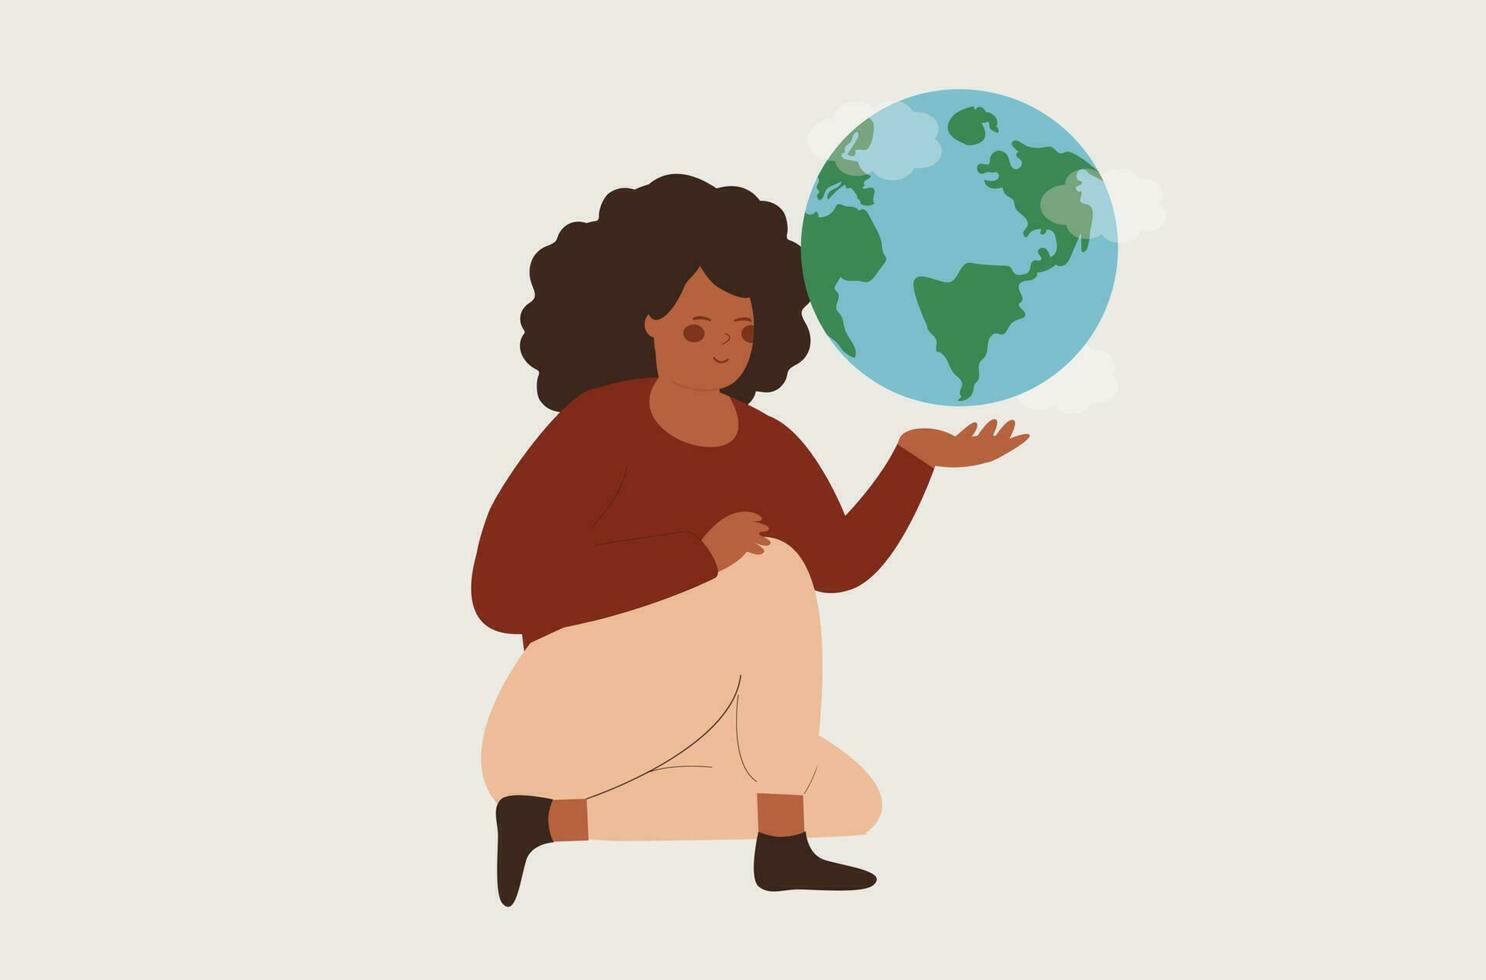 Black Woman holds the green earth globe and protects it. Activist African American mother cares about the planet and the climate change. Concept of Earth day, ecology movement, and sustainable energy. vector